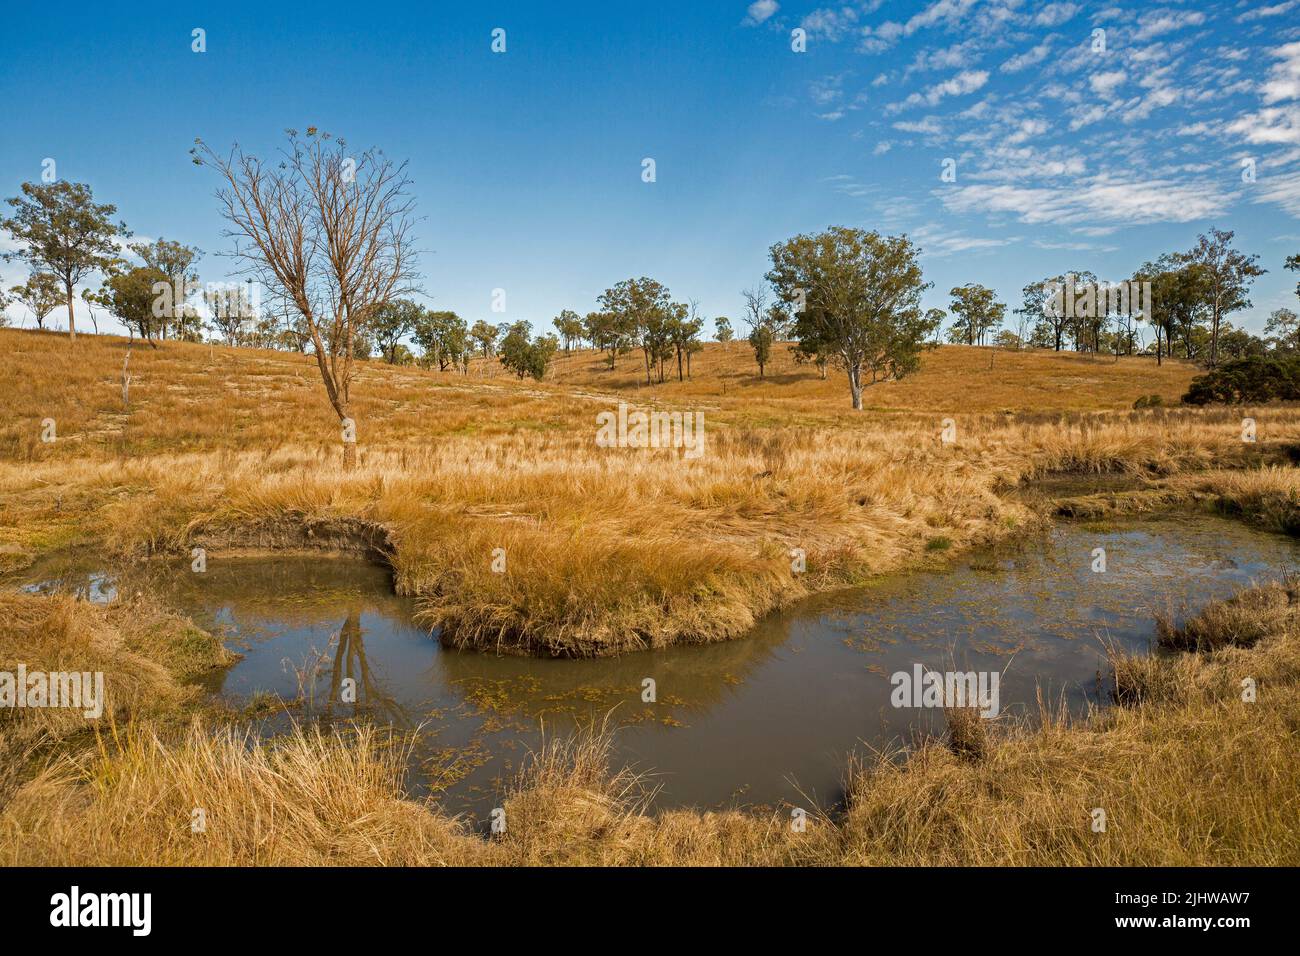 Australian rural landscape with golden grasses and scattered gum trees hemming creek at foot of low rolling hills under blue sky Stock Photo